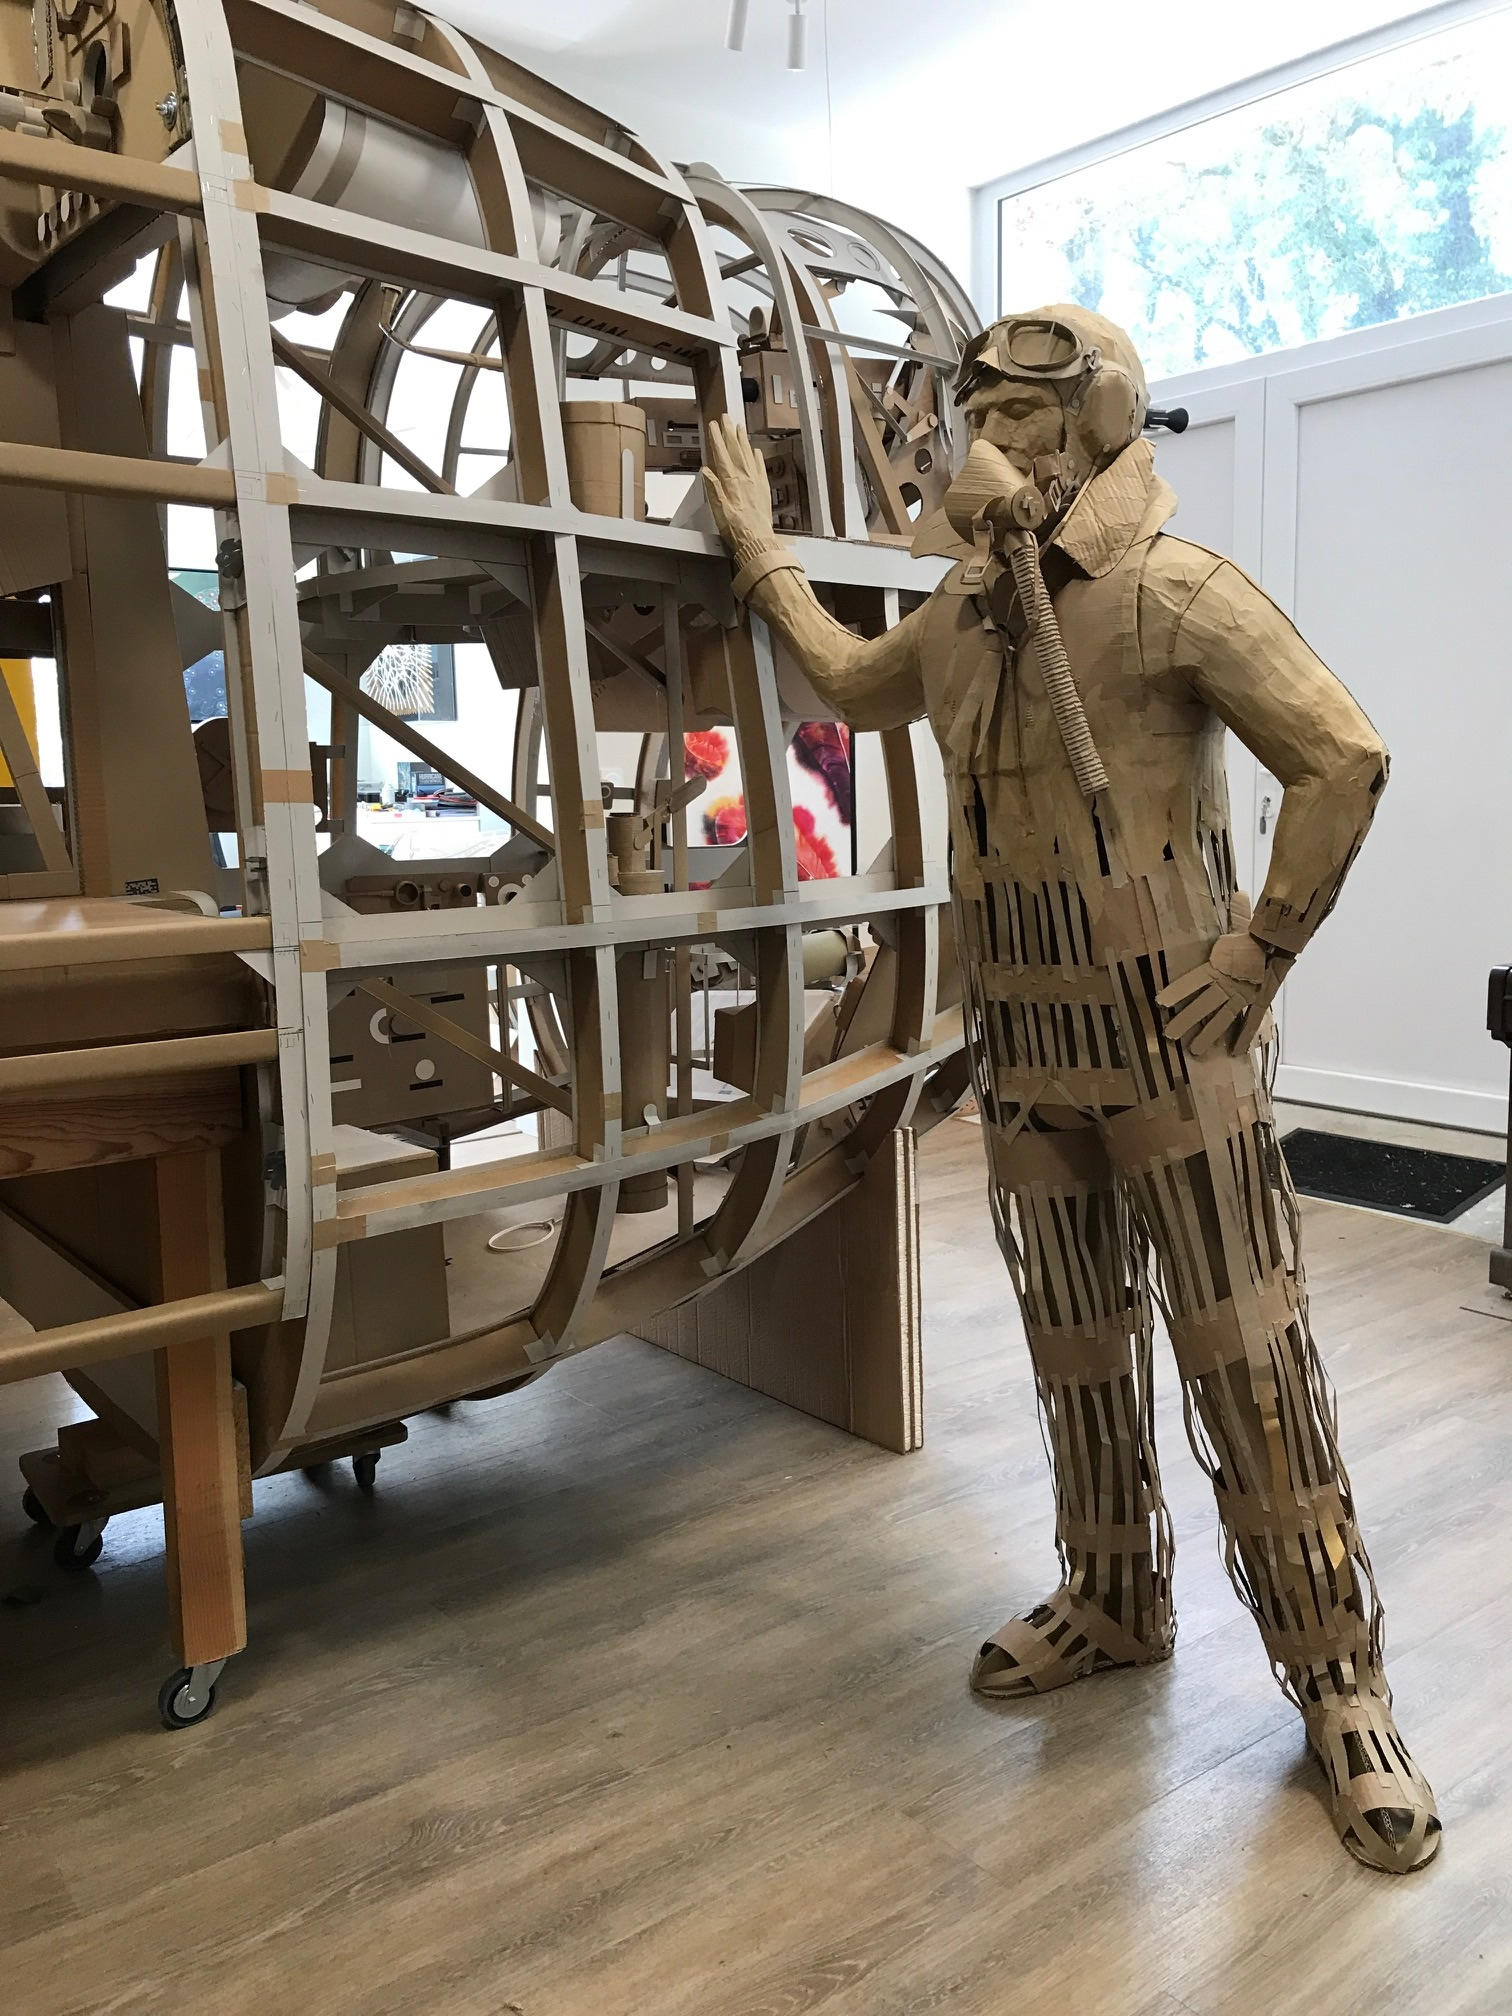 The Many, which features the life-size nose section sculpture of an RAF Lancaster by artist Suhail Shaikh, will be on display at The Atkinson in Southport